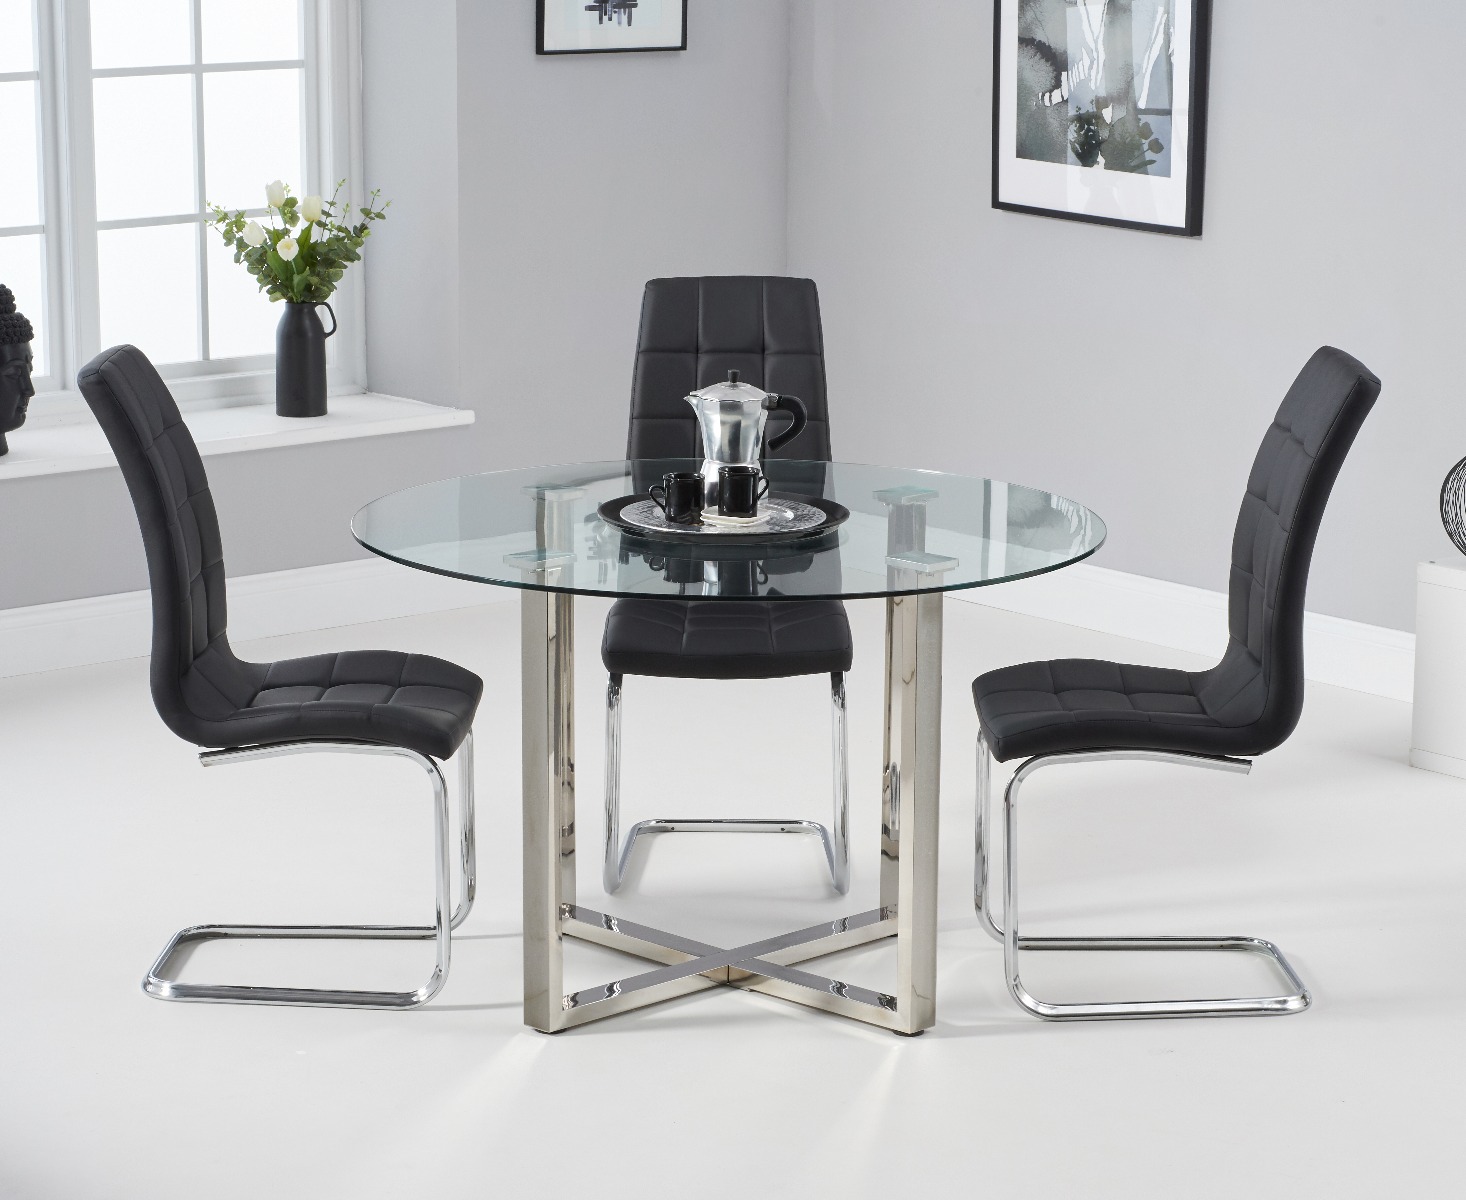 Photo 2 of Vaso 120cm round glass dining table with 4 grey vigo dining chairs